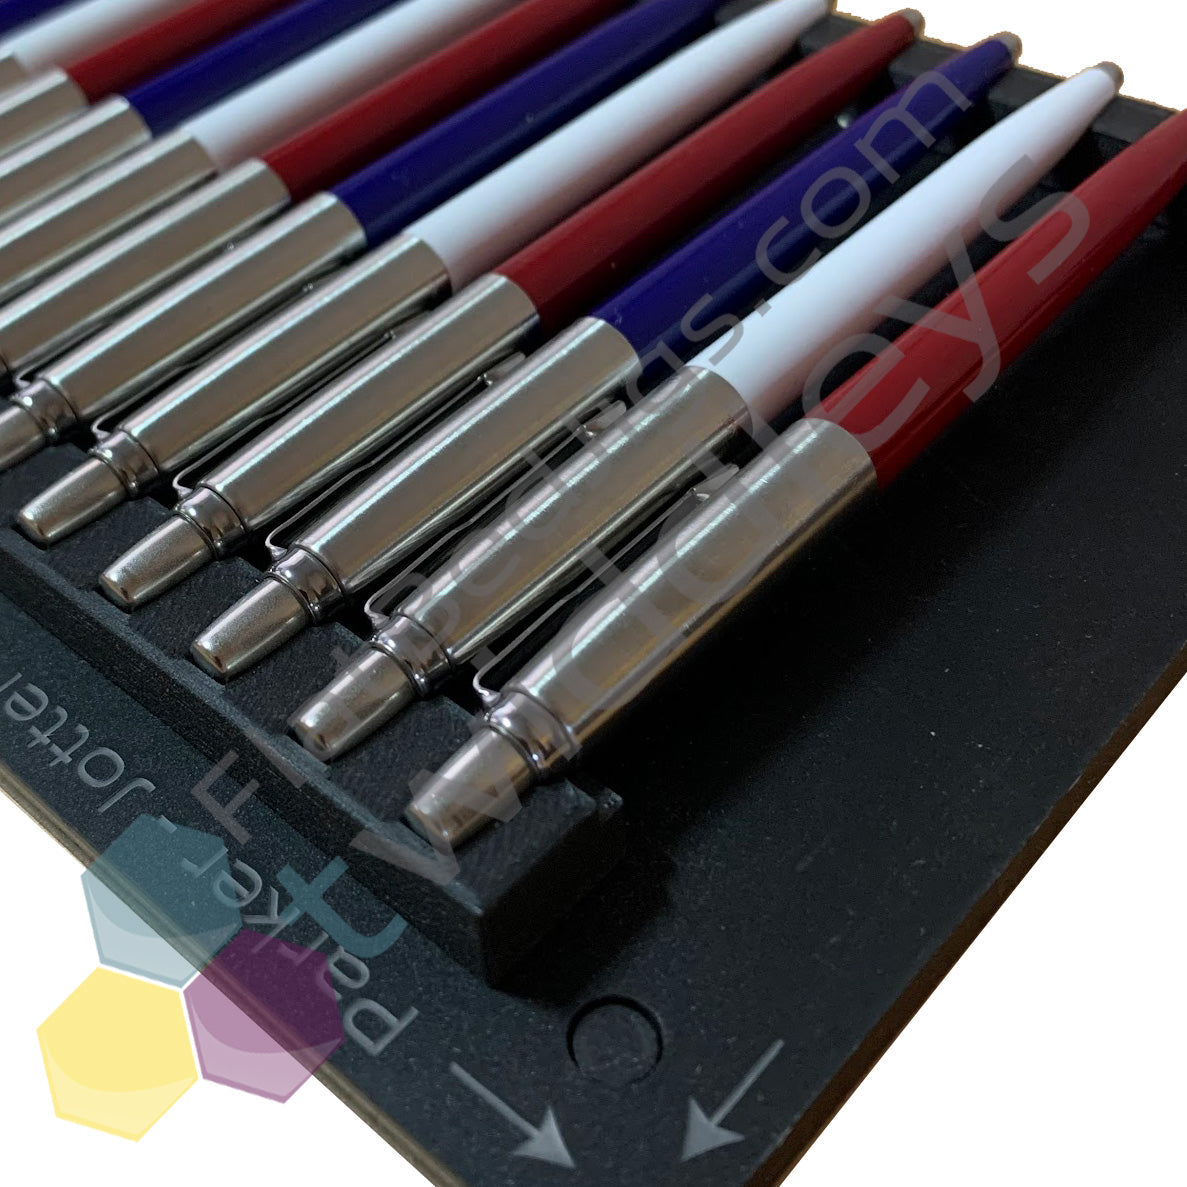 A4 Parker Jotter Pen Printing Jig for A4 Flatbed Printers